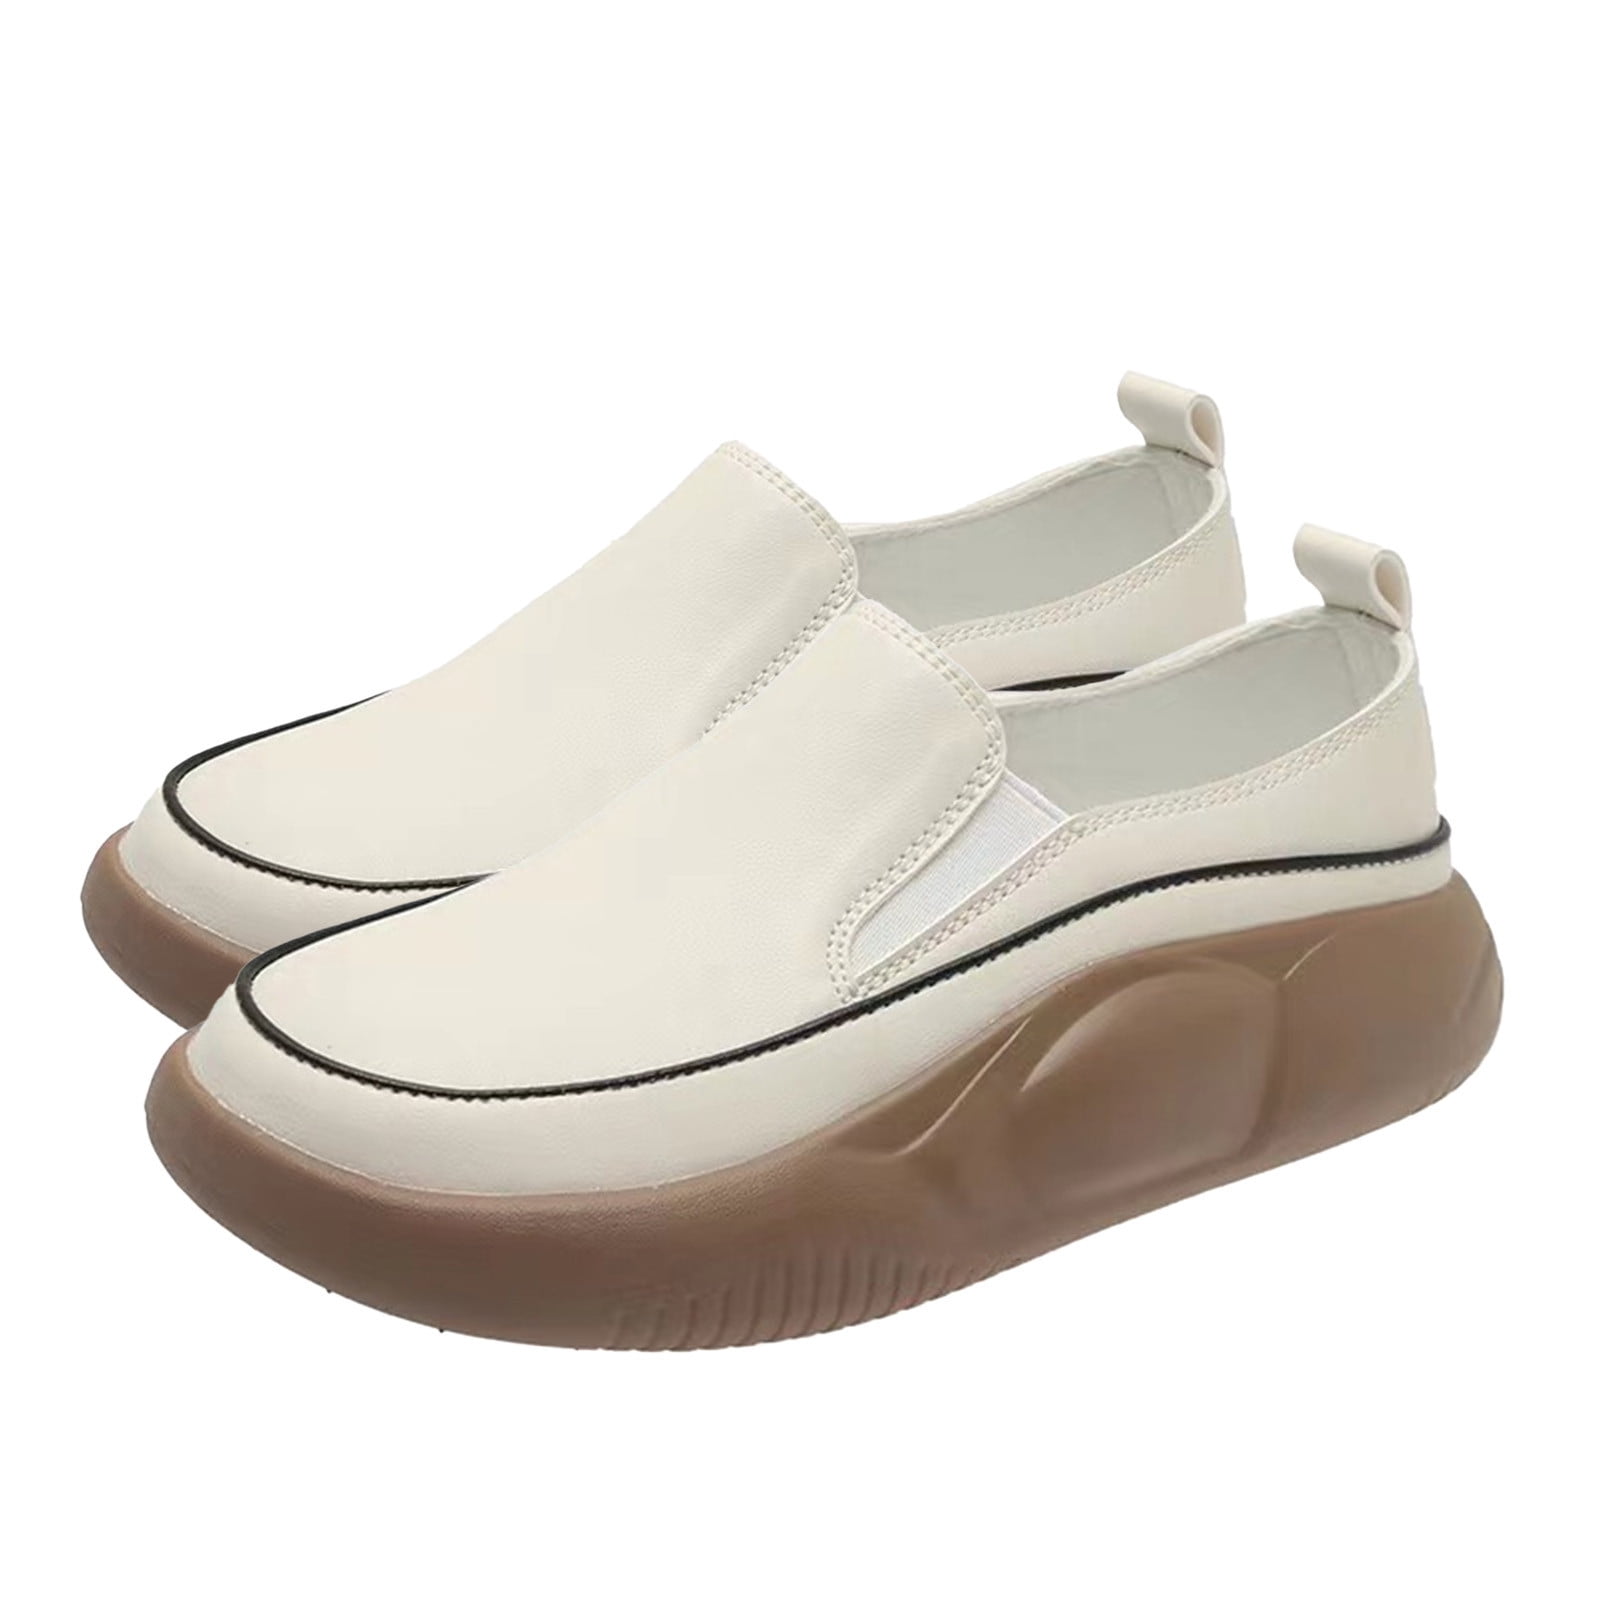 Lovskoo 2024 Women's Casual Platform Loafers Round Toe Thick Sole Slip On  Maternity Shoes Soft Leather Retro Flats Beige 